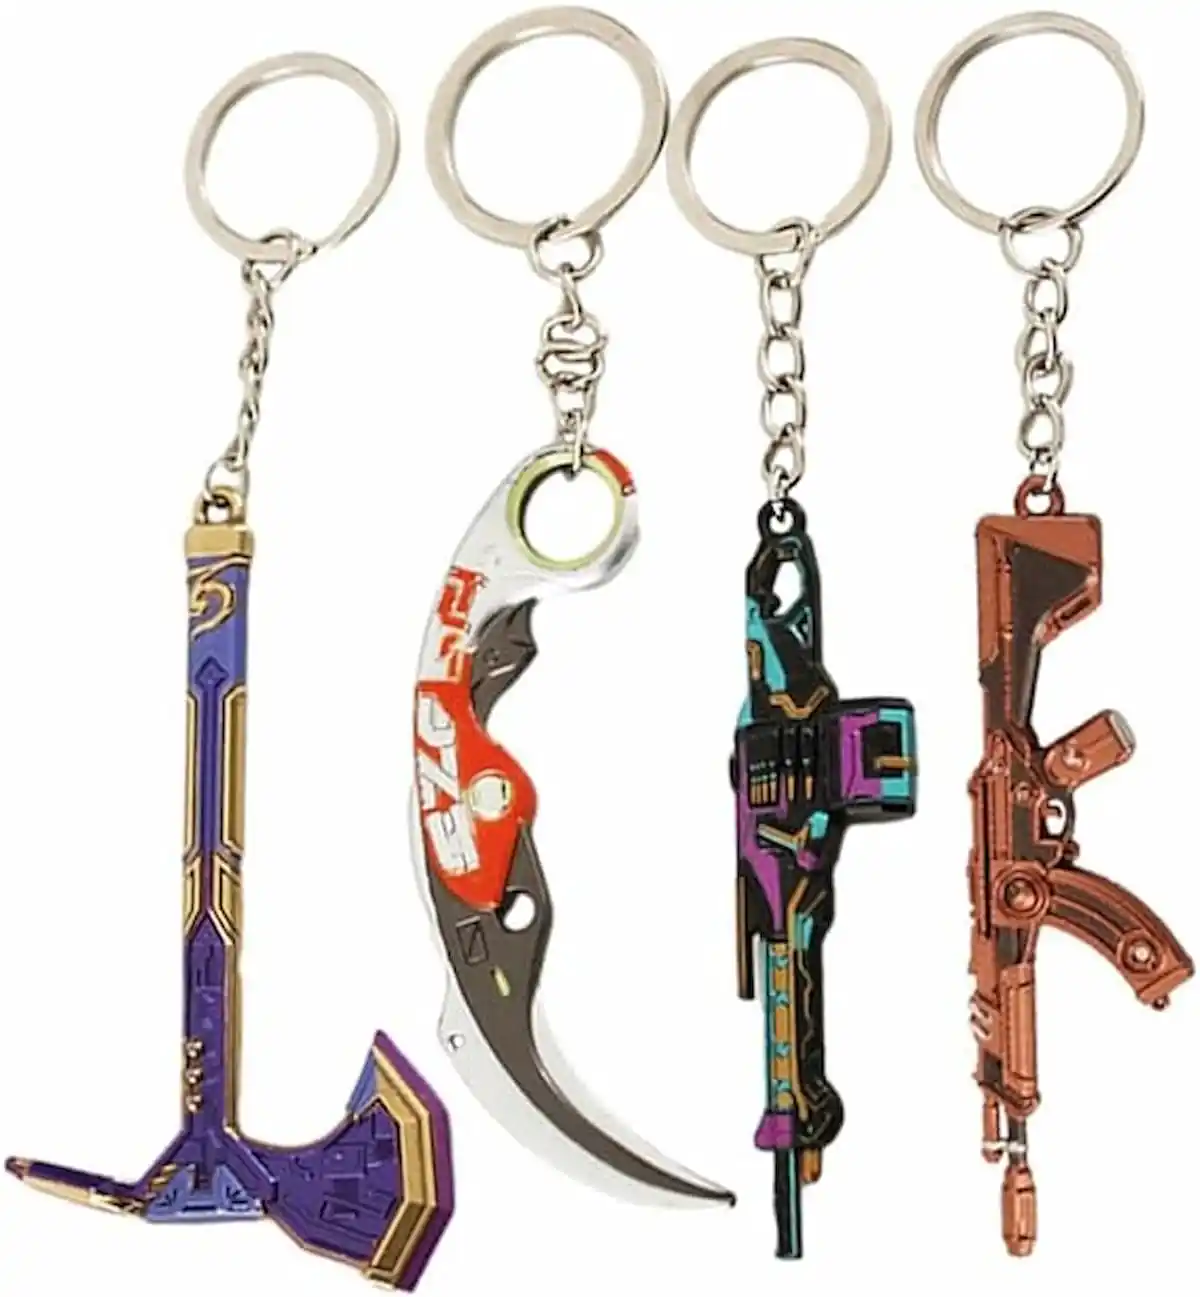 An image of four Valorant weapon keychains. 